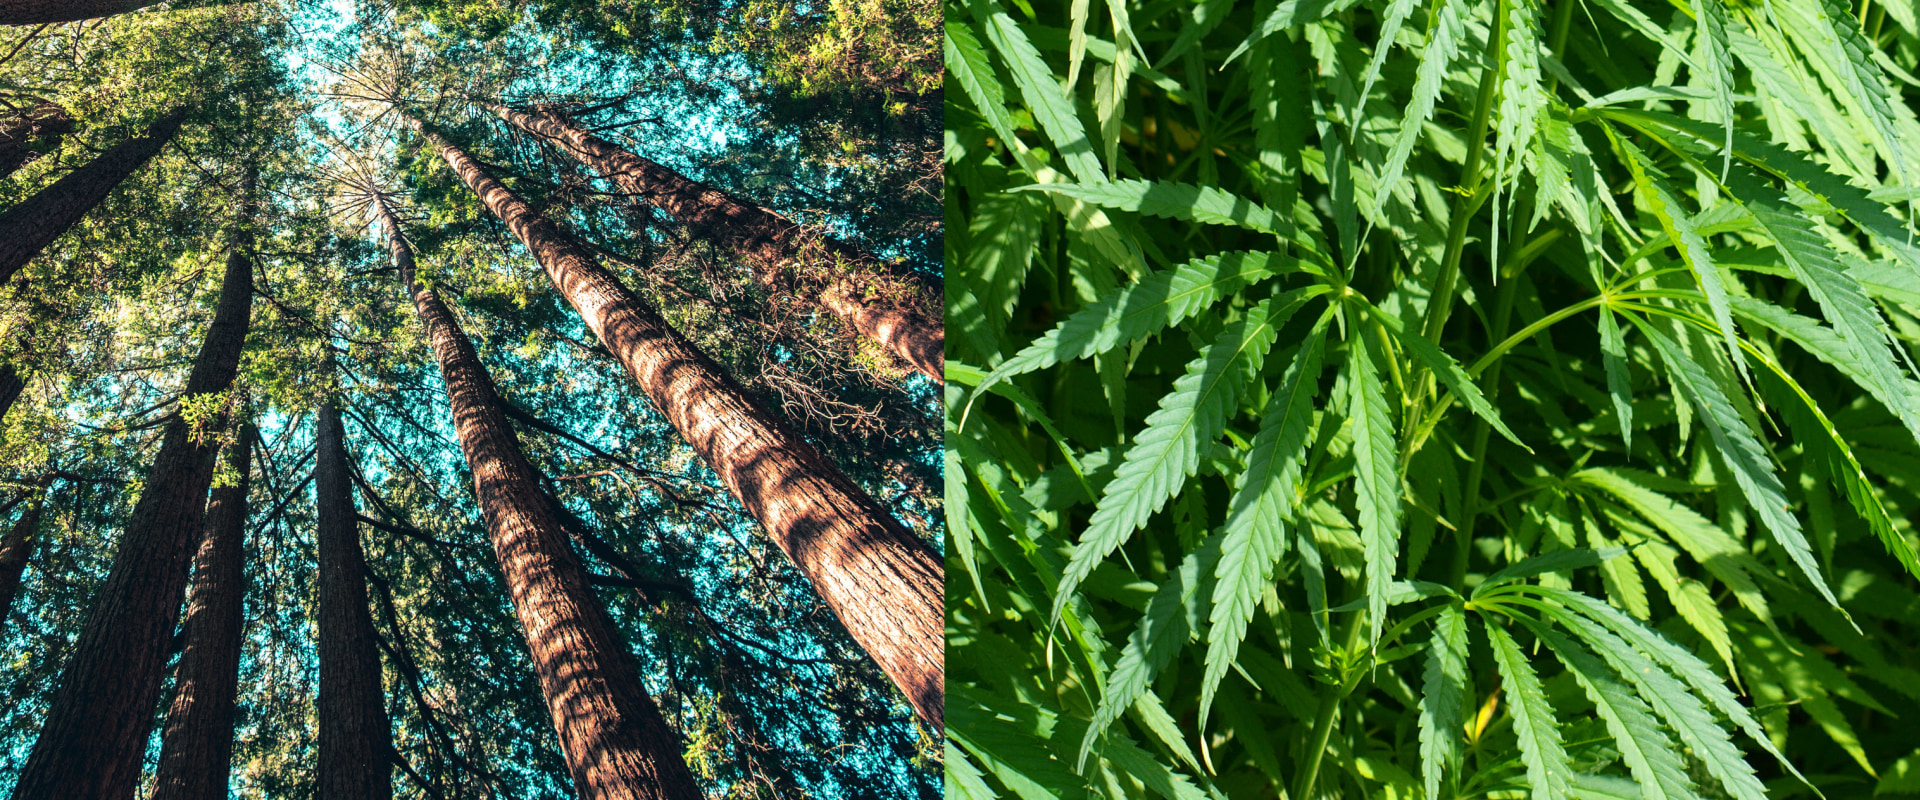 The Benefits of Hemp: Why it's Better than Trees